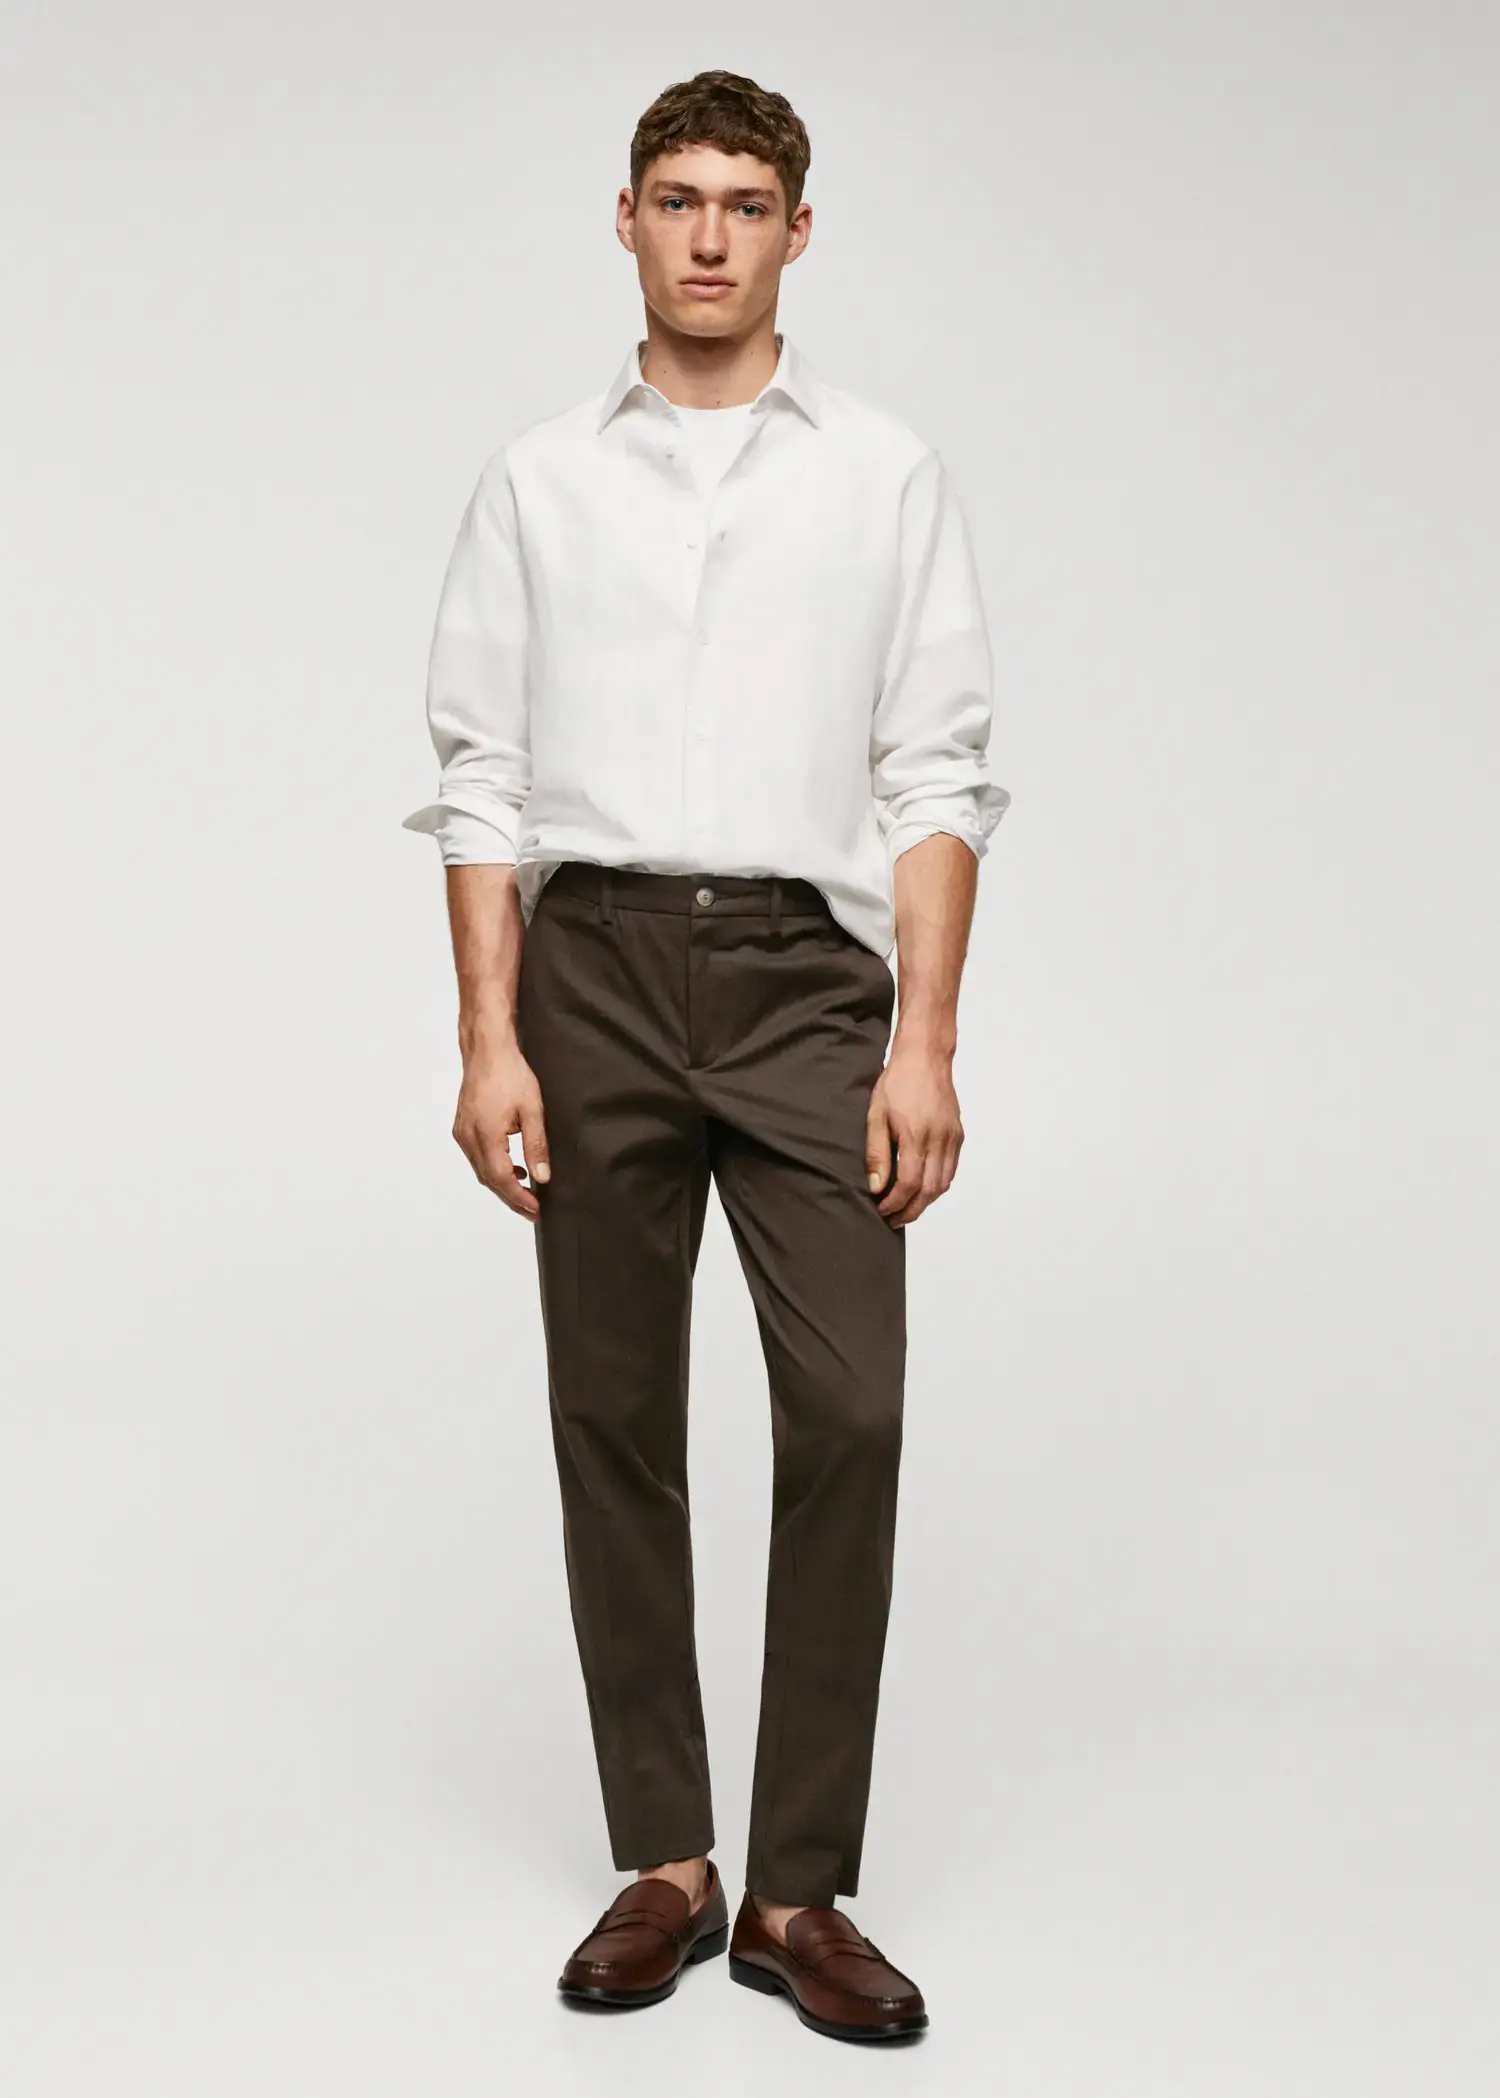 Mango Slim fit chino trousers. a man wearing a white shirt and brown pants. 